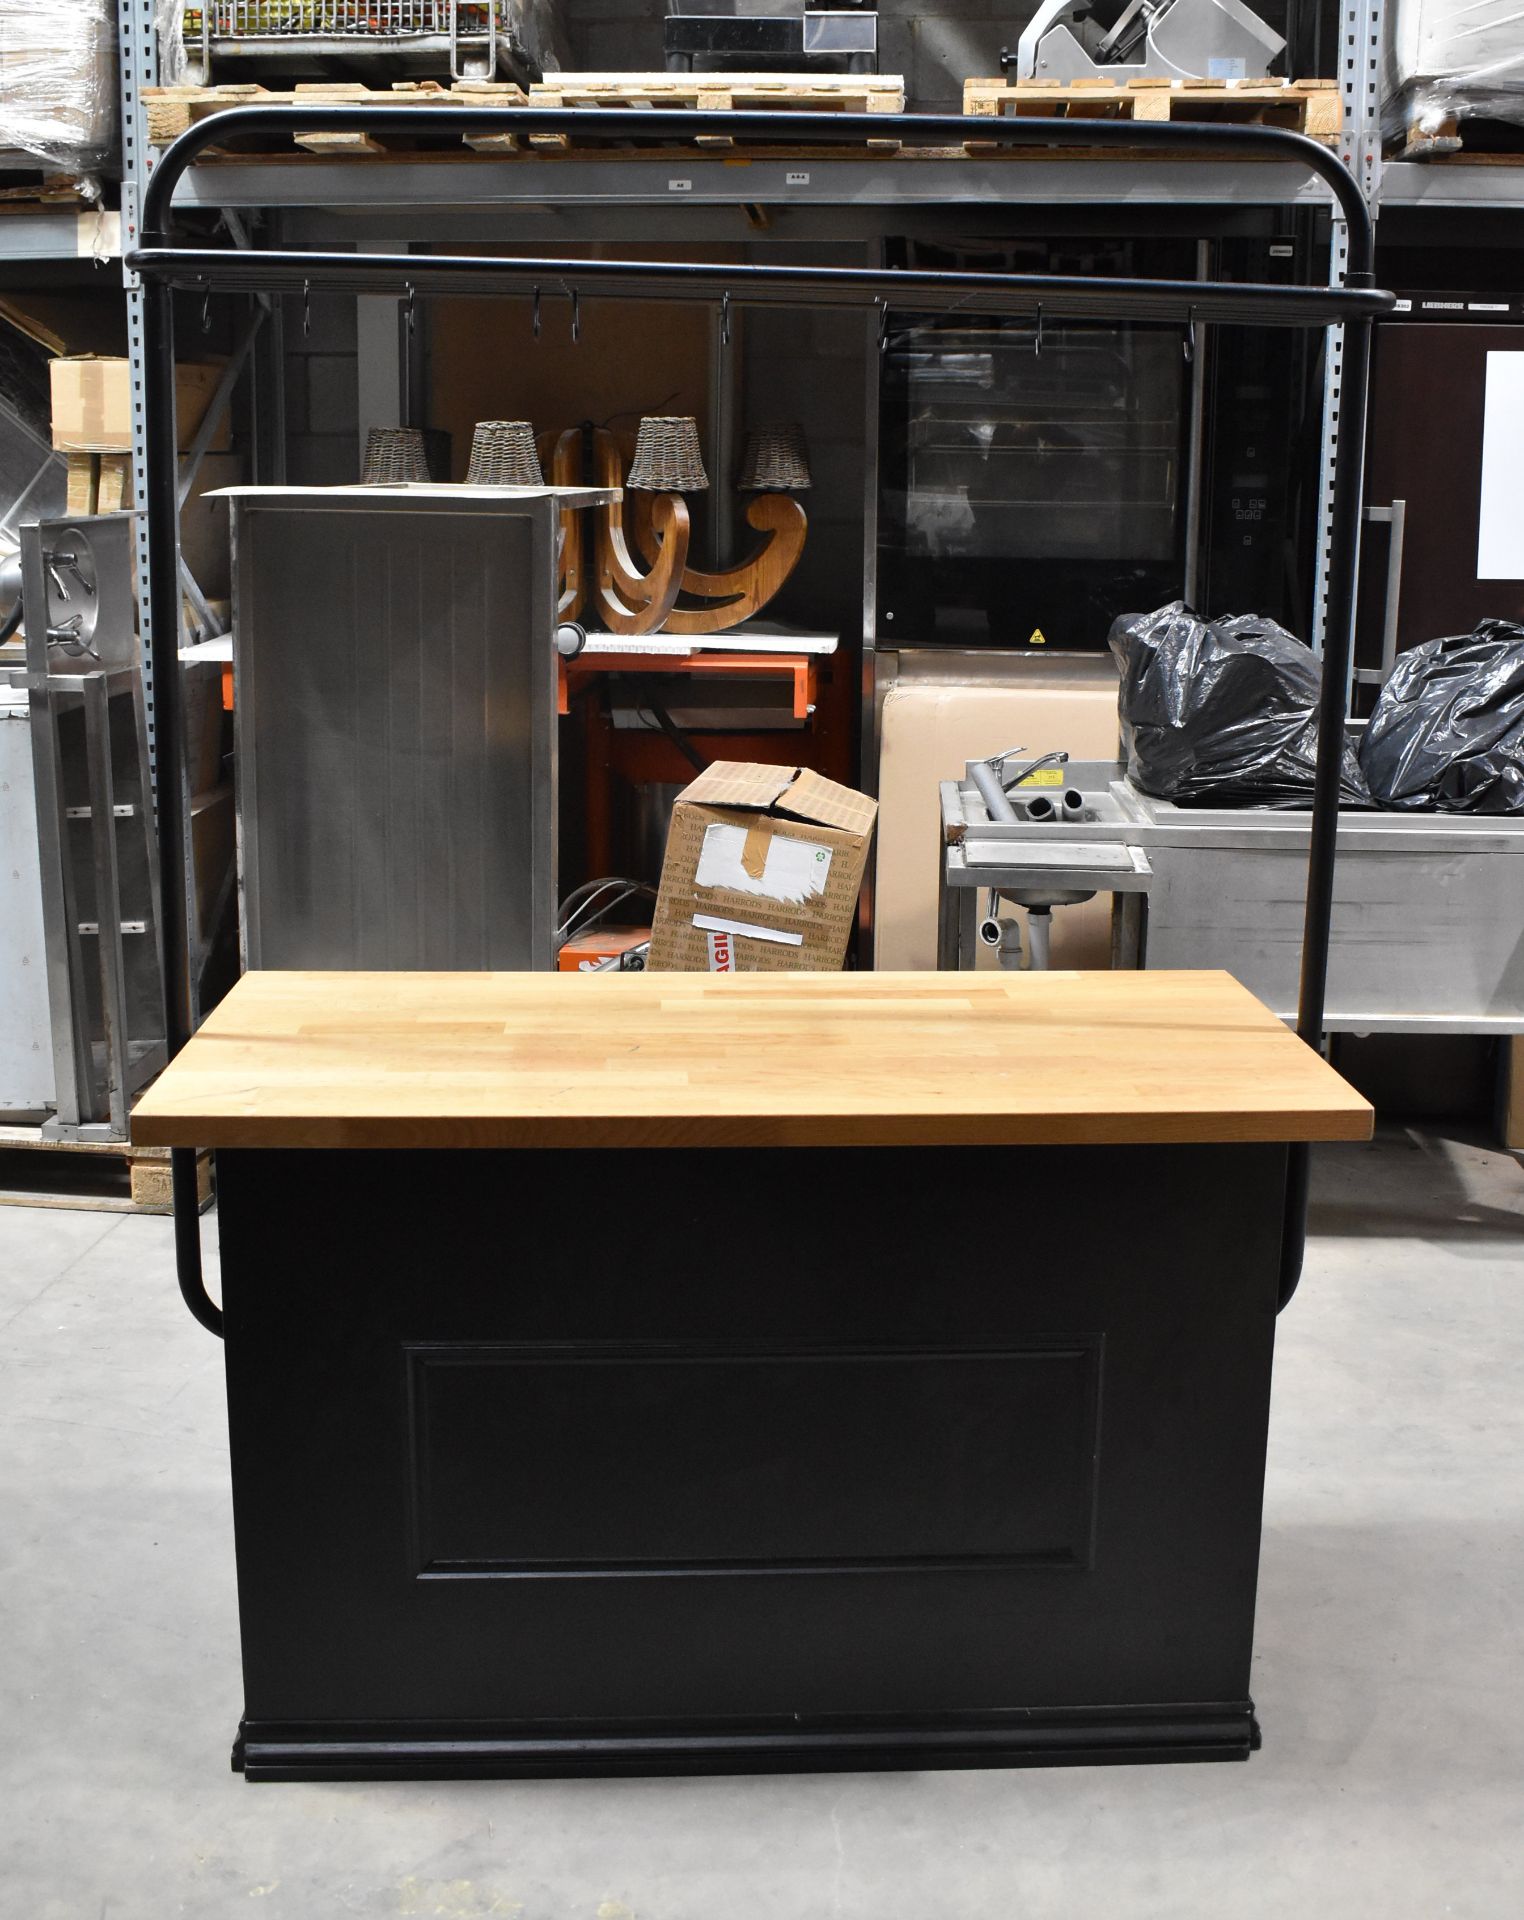 1 x Wooden Counter In Black With Wood Coloured Top and Metal Overrack Display Shelf With Hooks - 84/